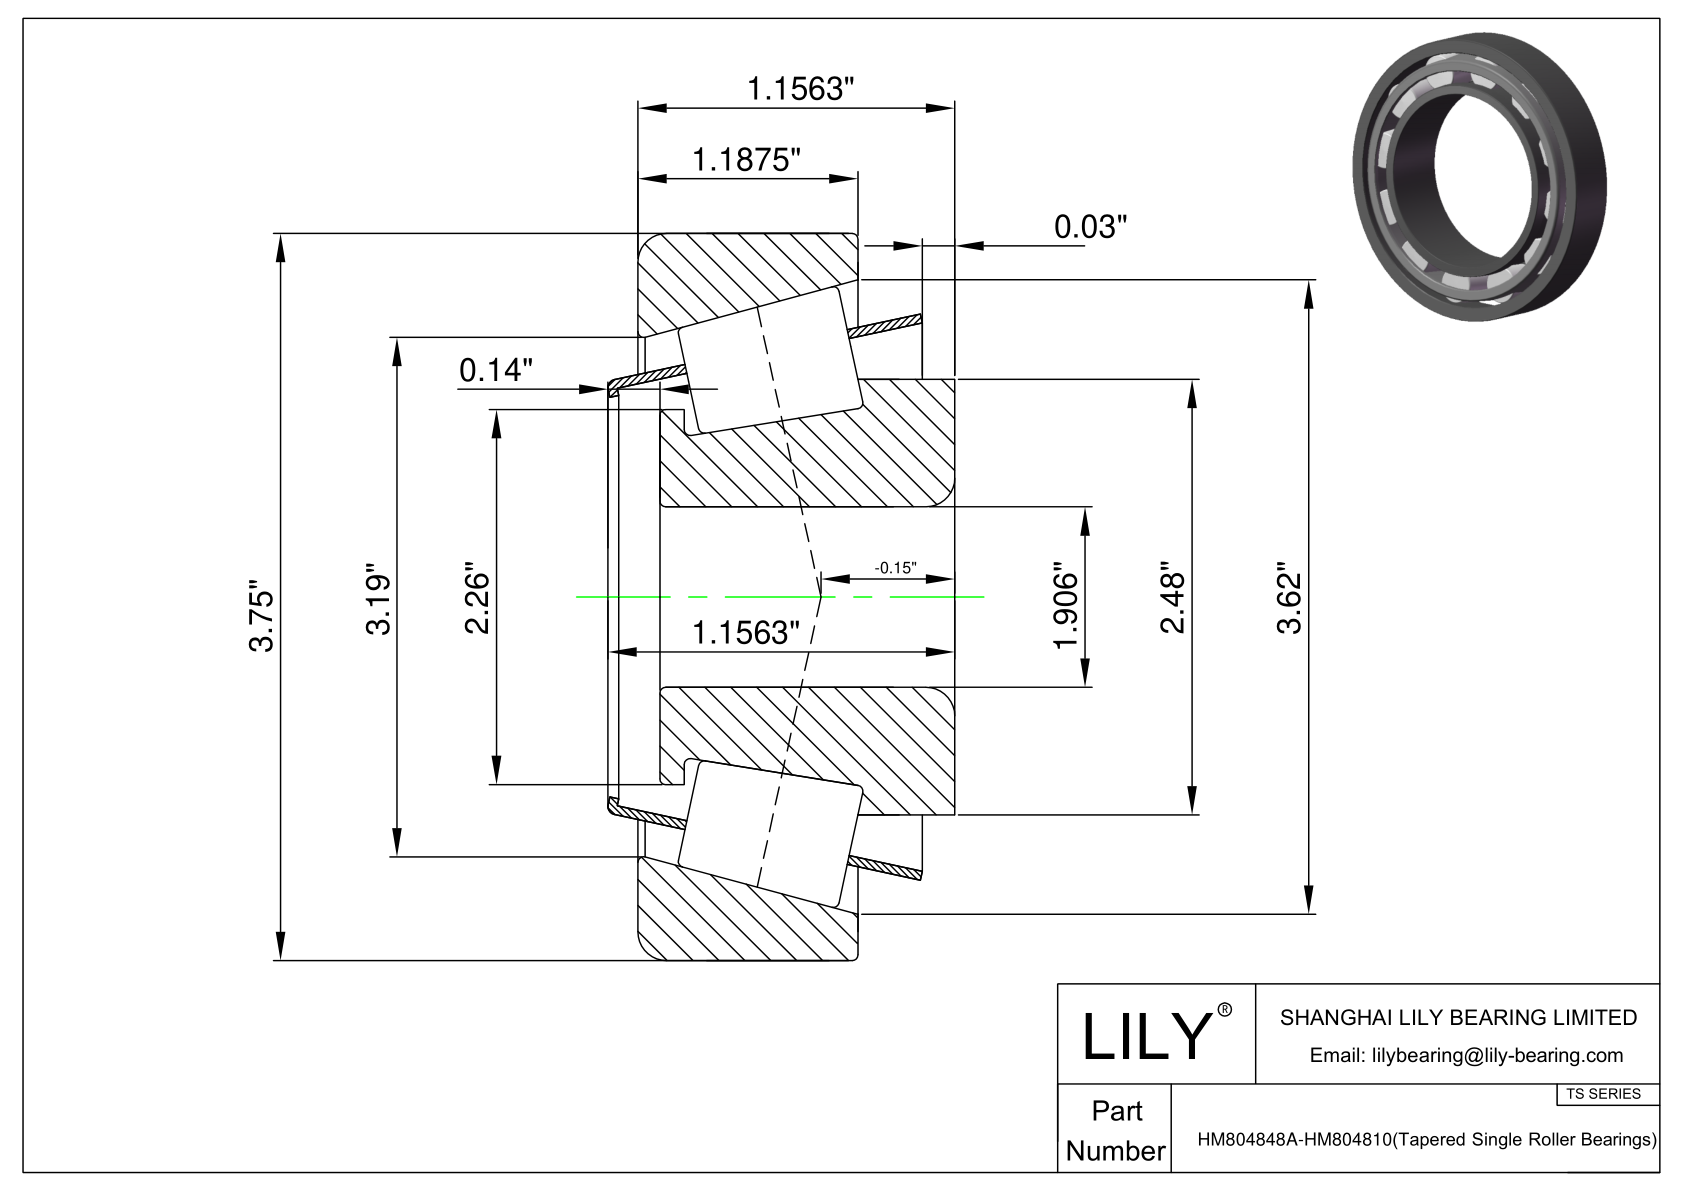 HM804848A-HM804810 TS (Tapered Single Roller Bearings) (Imperial) cad drawing